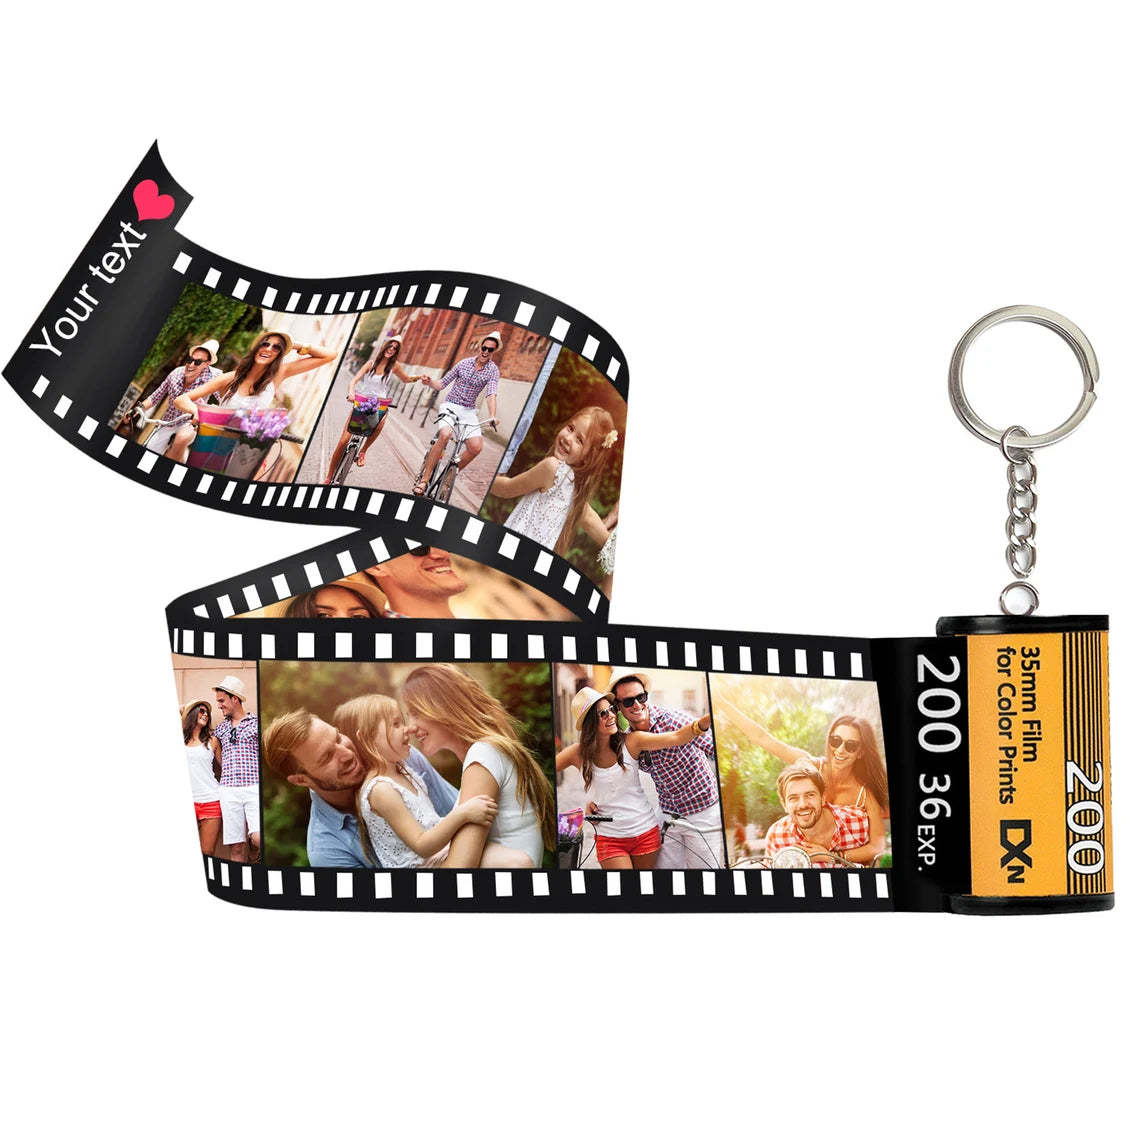 Custom Text For The Film Roll Keychain Personalised Picture Keychain with Reel Album Customized Anniversary Gifts - soufeeluk